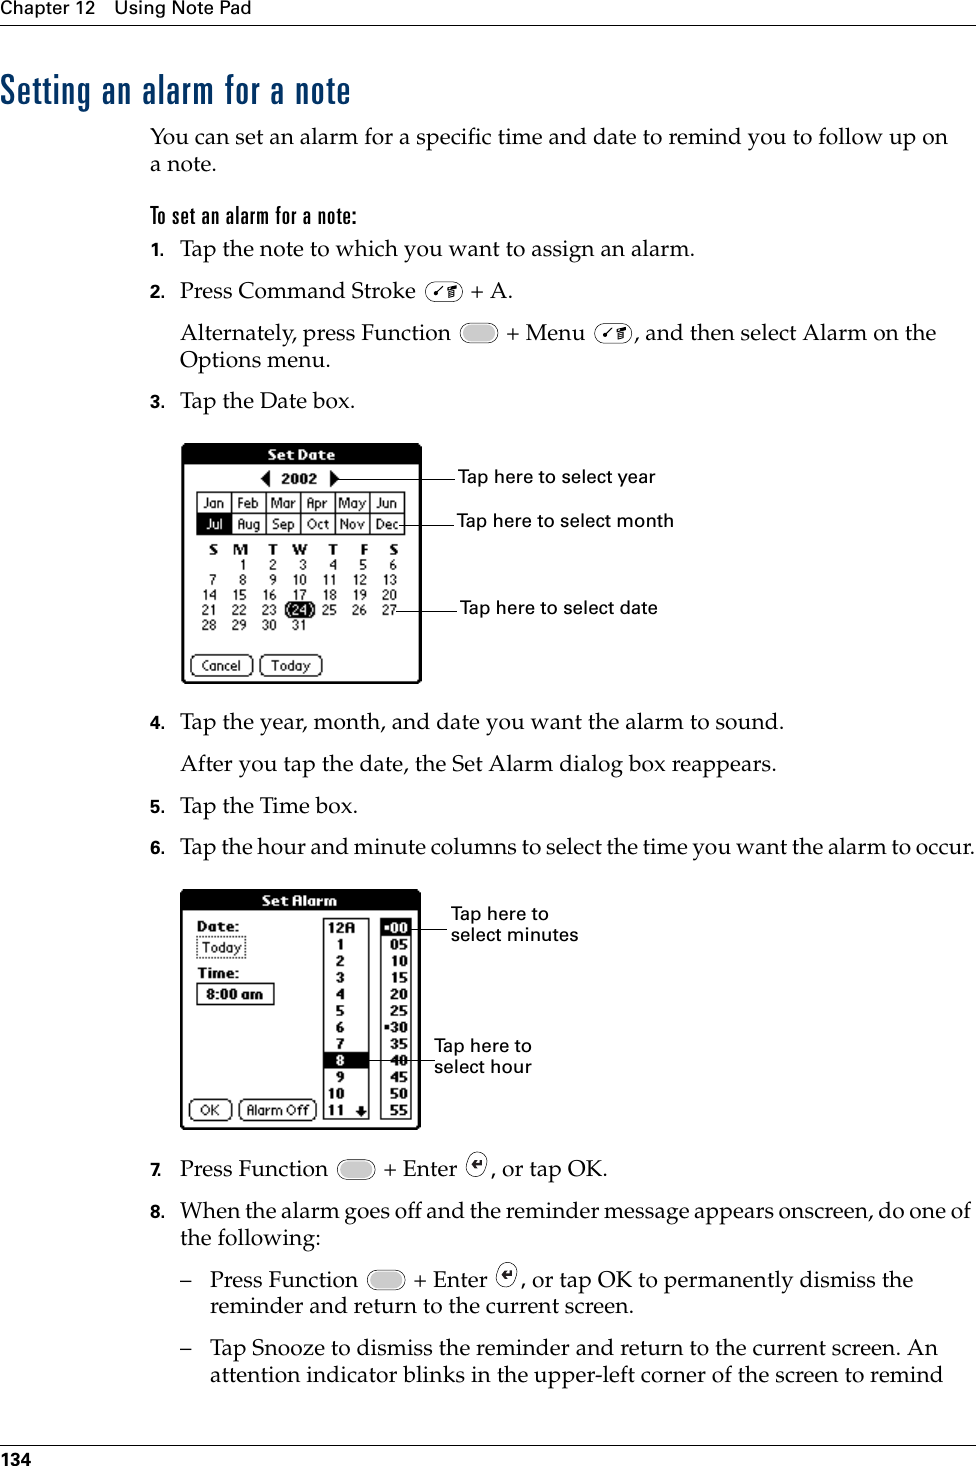 Chapter 12 Using Note Pad134Setting an alarm for a noteYou can set an alarm for a specific time and date to remind you to follow up on anote.To set an alarm for a note:1. Tap the note to which you want to assign an alarm.2. Press Command Stroke   + A.Alternately, press Function   + Menu  , and then select Alarm on the Options menu.3. Tap the Date box.4. Tap the year, month, and date you want the alarm to sound.After you tap the date, the Set Alarm dialog box reappears.5. Tap the Time box.6. Tap the hour and minute columns to select the time you want the alarm to occur.7. Press Function   + Enter  , or tap OK.8. When the alarm goes off and the reminder message appears onscreen, do one of the following:– Press Function   + Enter  , or tap OK to permanently dismiss the reminder and return to the current screen.– Tap Snooze to dismiss the reminder and return to the current screen. An attention indicator blinks in the upper-left corner of the screen to remind Tap here to select monthTap here to select yearTap here to select dateTap here to select minutesTap here to select hourPalm, Inc. Confidential